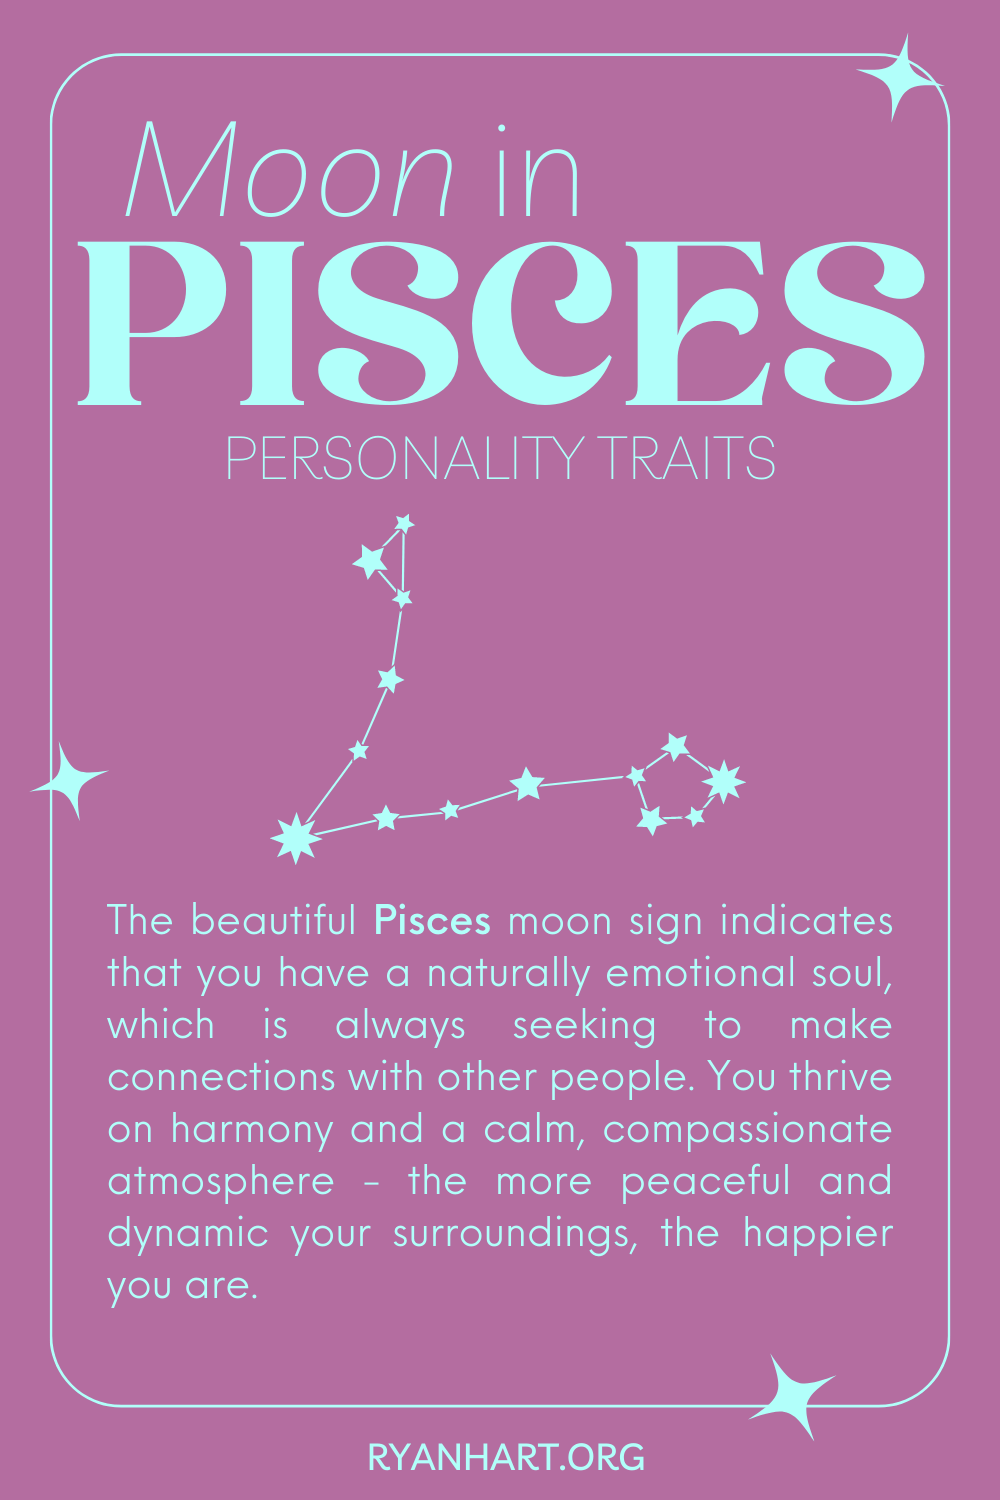 Pisces Moon Sign Personality Traits | Ryan Hart